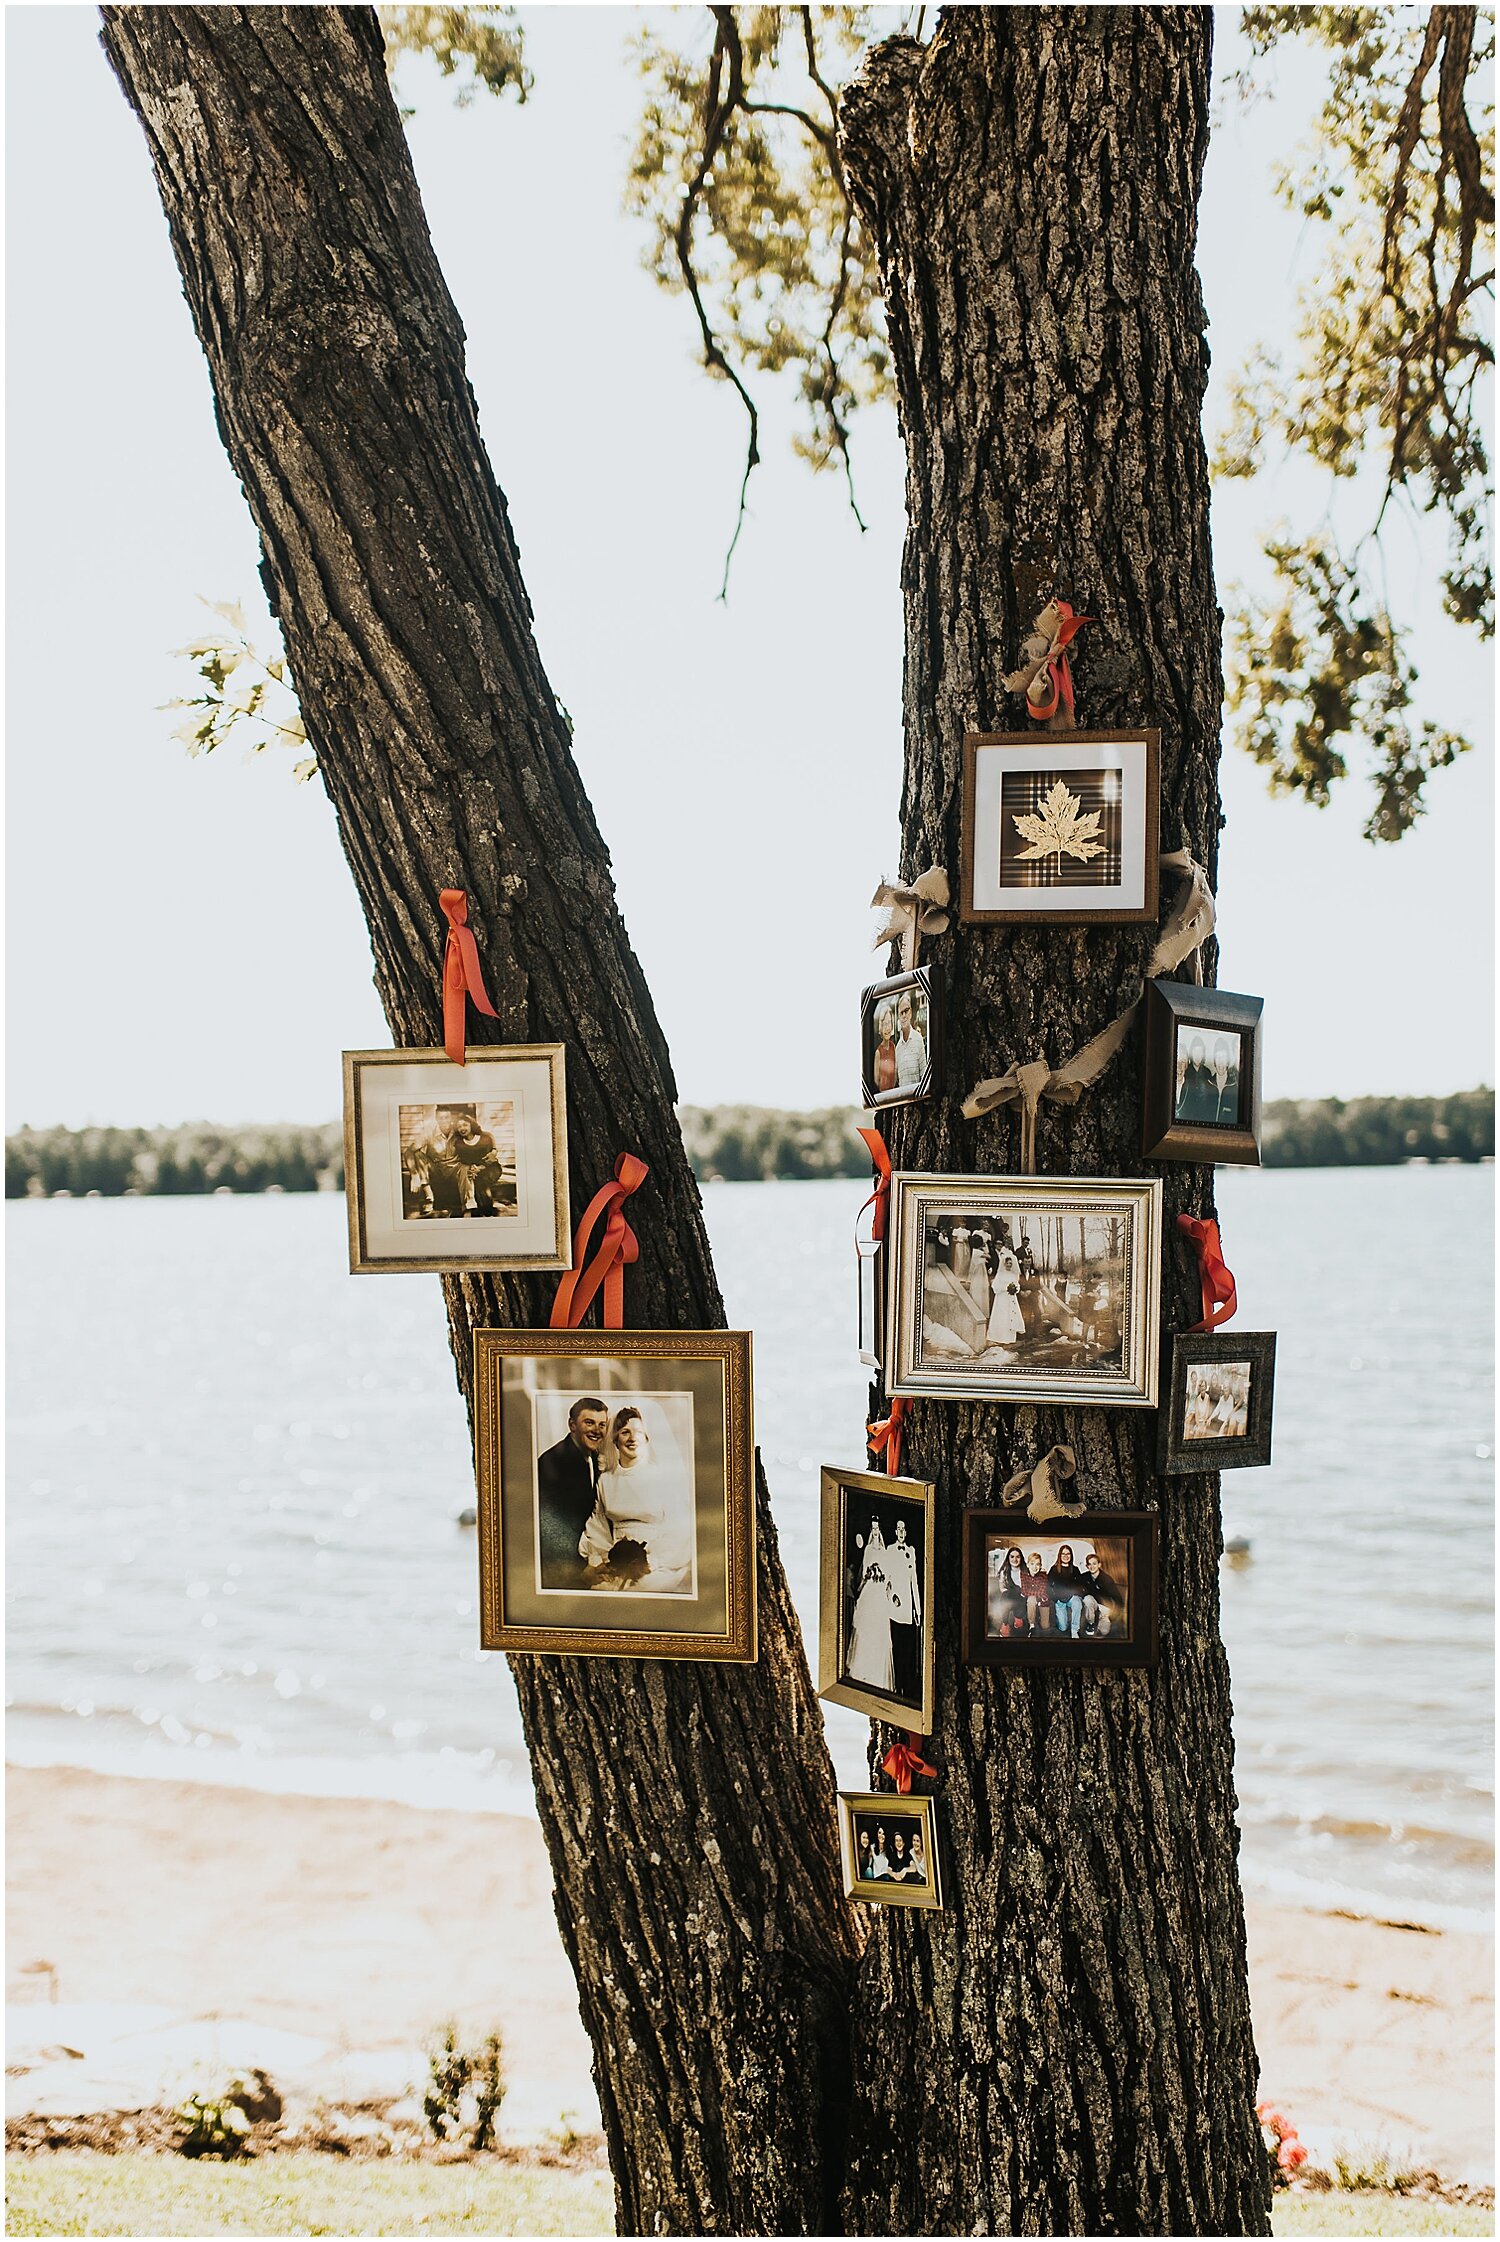  photos of bride and groom’s families on the trees 